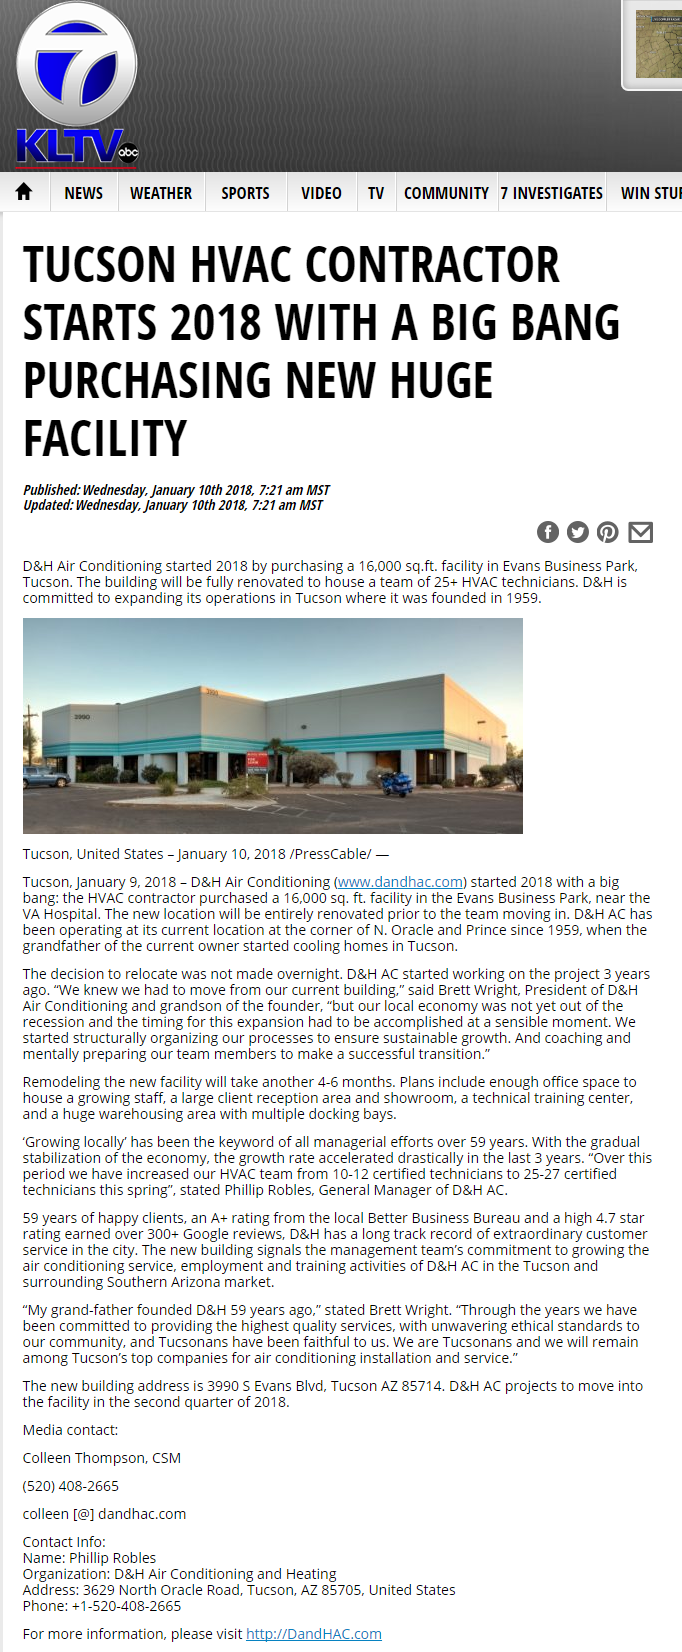 D&H's new Tucson facilities in the news on ABC 7 KLTV